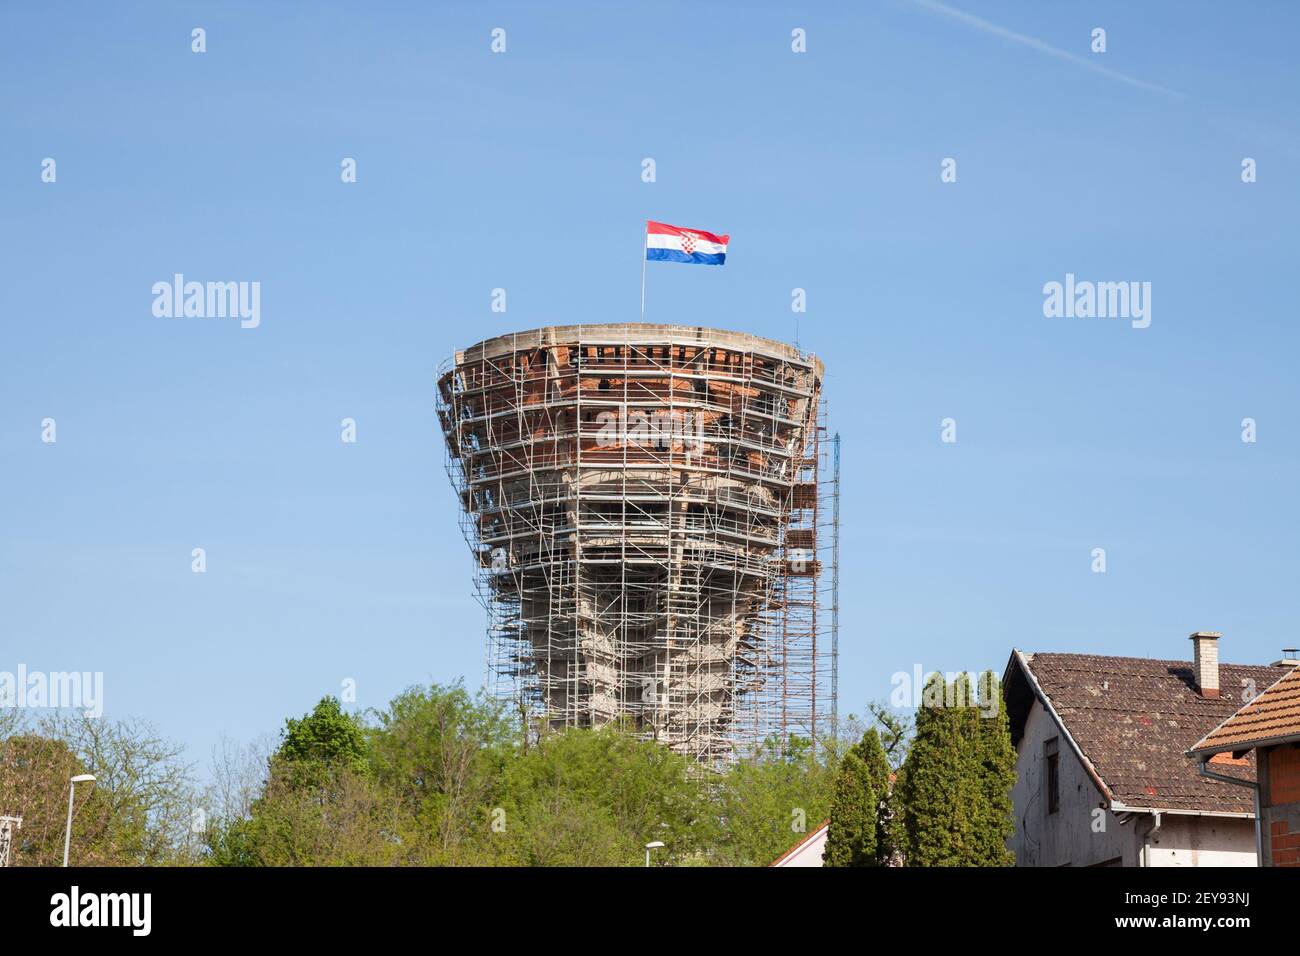 Water tower from Vukovar (Vukovarski Vodotoranj), with bullet and missile holes from the 1991-1995 conflict, which opposed Serbian to Croatian forces. Stock Photo